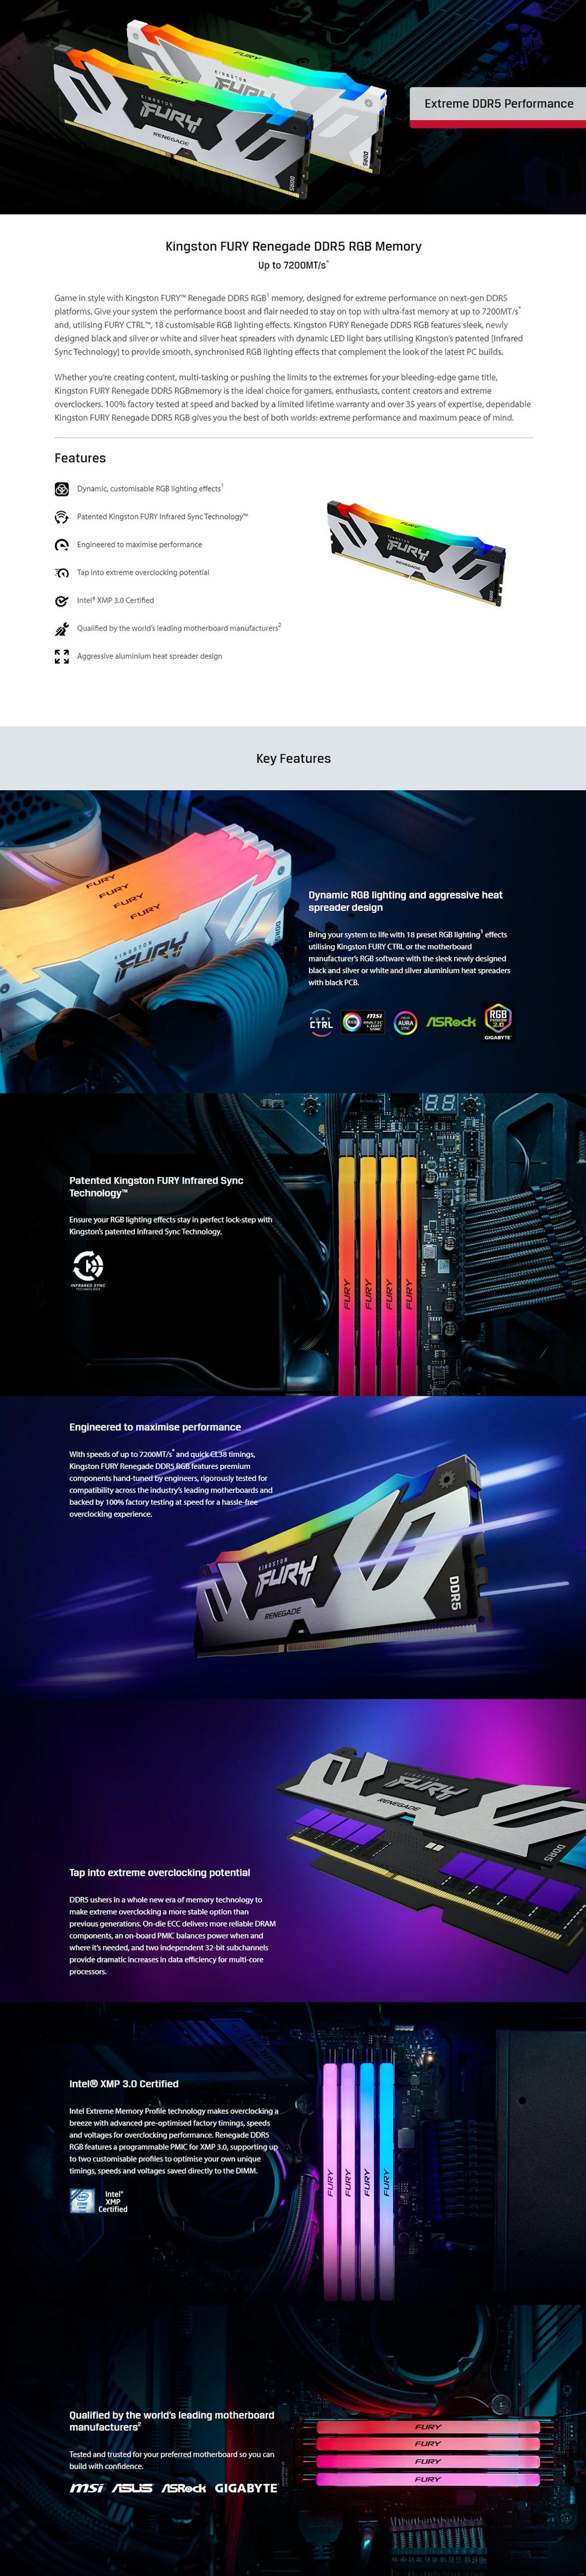 A large marketing image providing additional information about the product Kingston 96GB Kit (2x48GB) DDR5 Fury Renegade RGB CL32 6000Mhz - Black - Additional alt info not provided